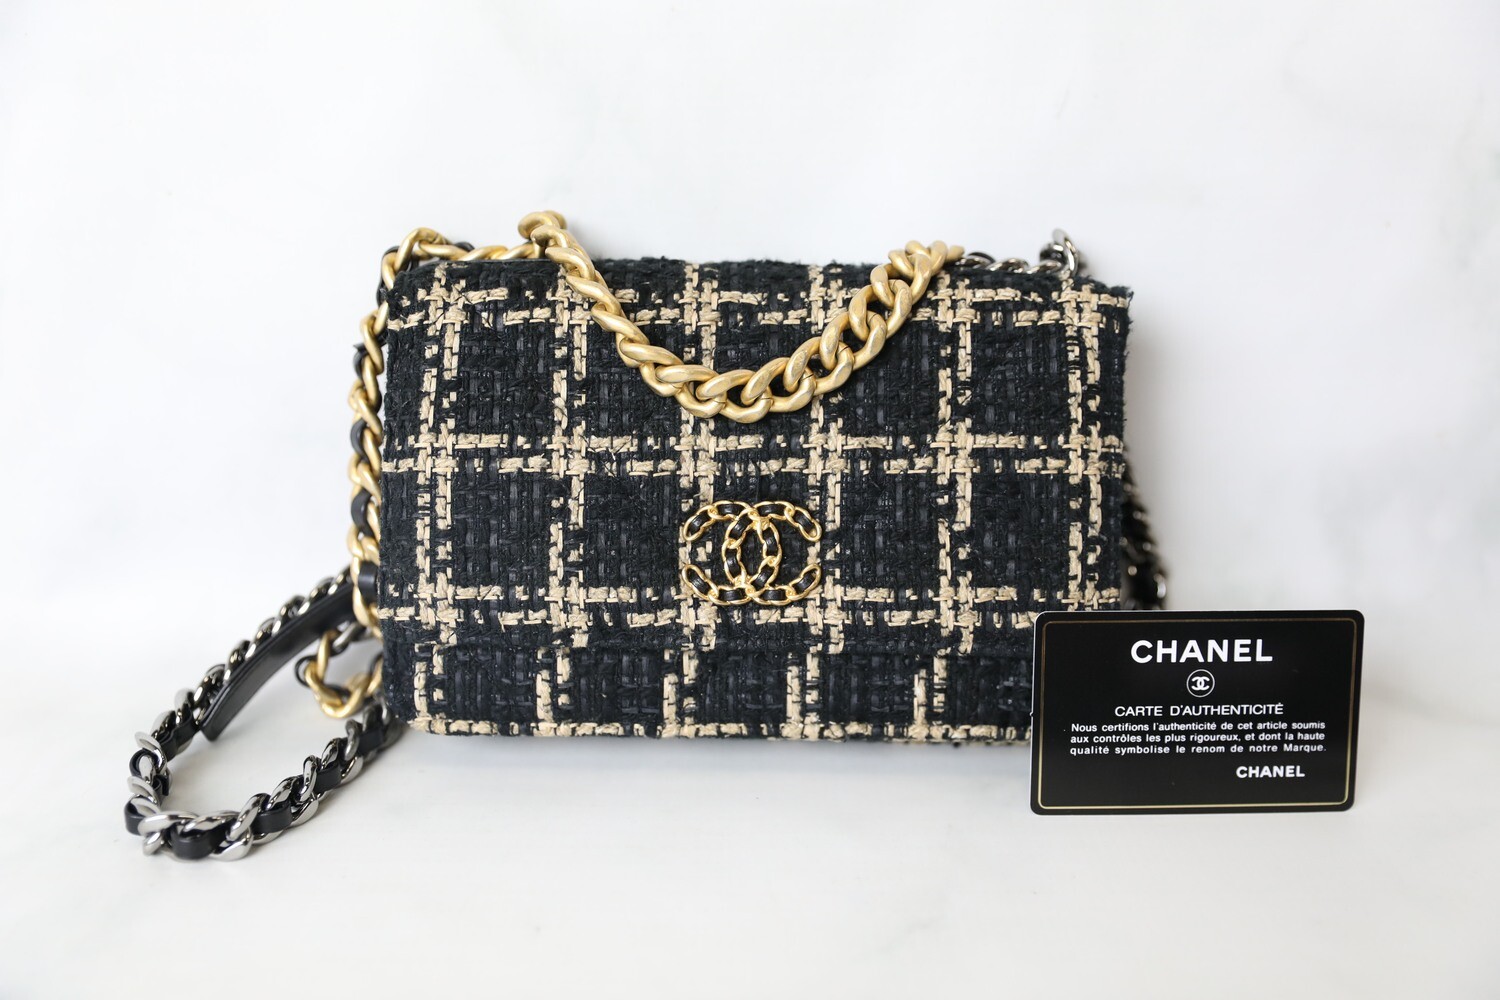 Chanel 19 Wallet on Chain, Beige and Black Plaid Tweed, Preowned in Box  WA001